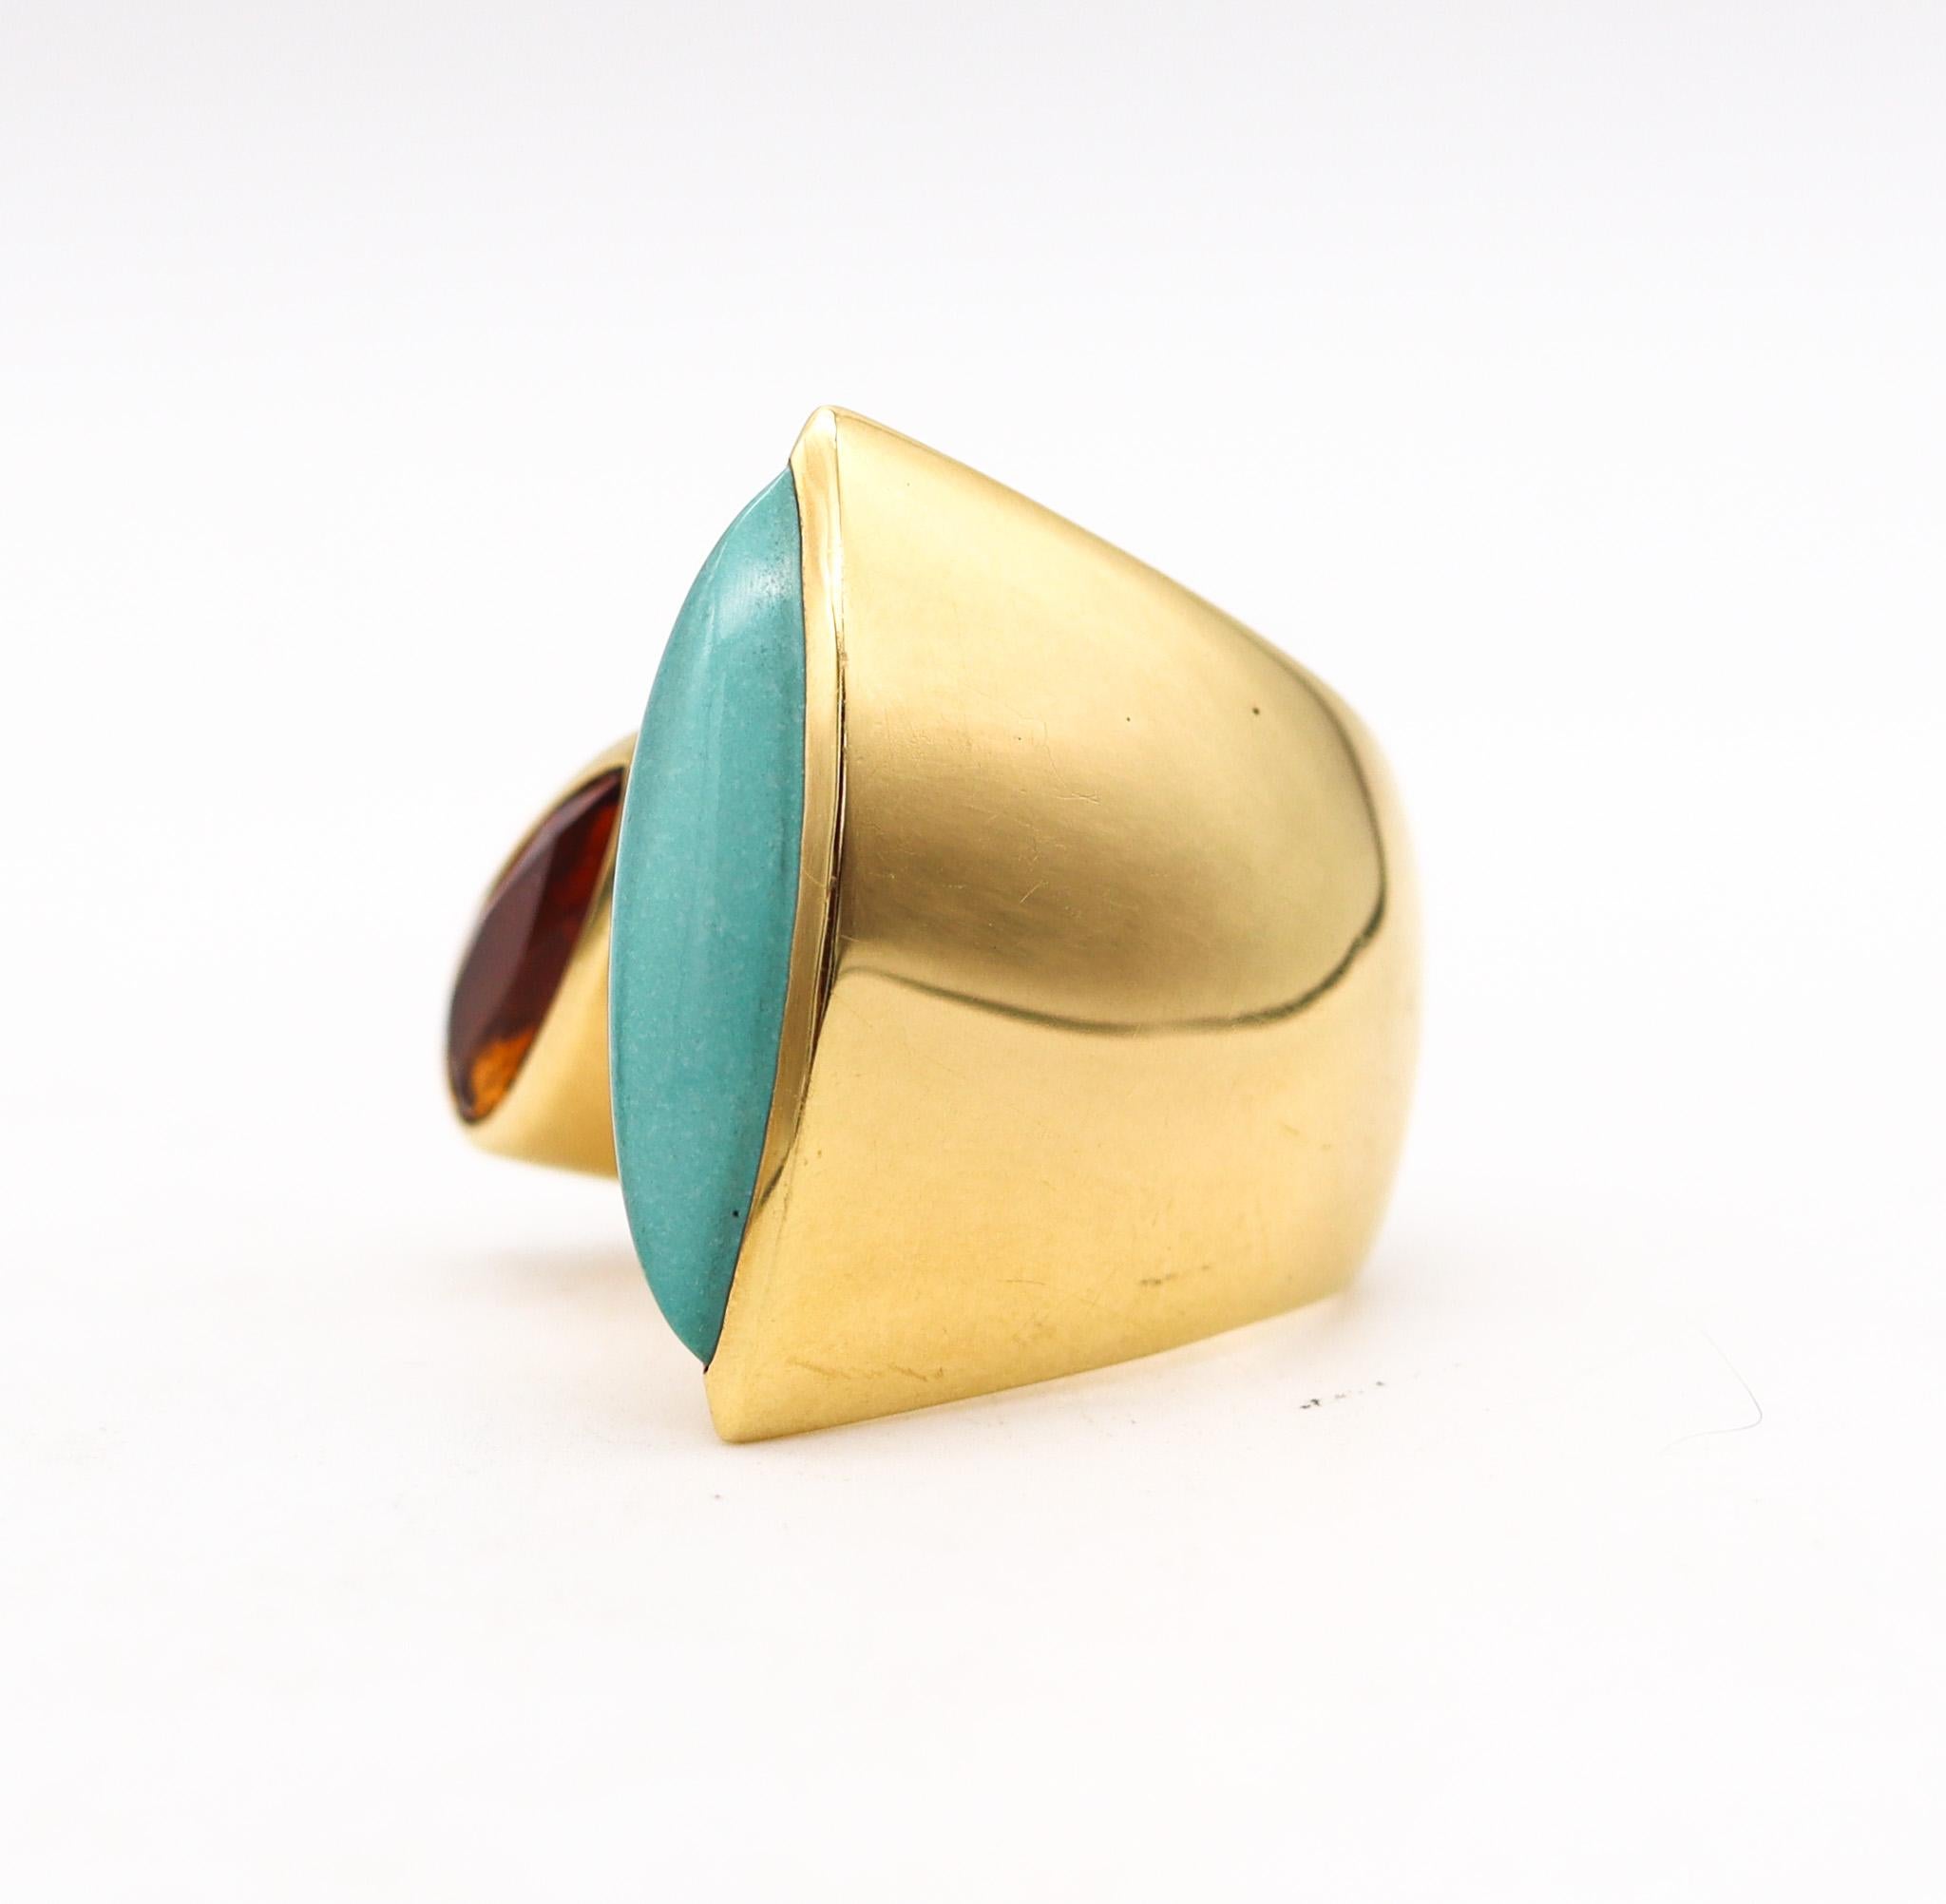 Italian Modernist Bypass Ring In 18Kt Yellow Gold 8.14 Ctw Turquoise And Citrine In Excellent Condition For Sale In Miami, FL